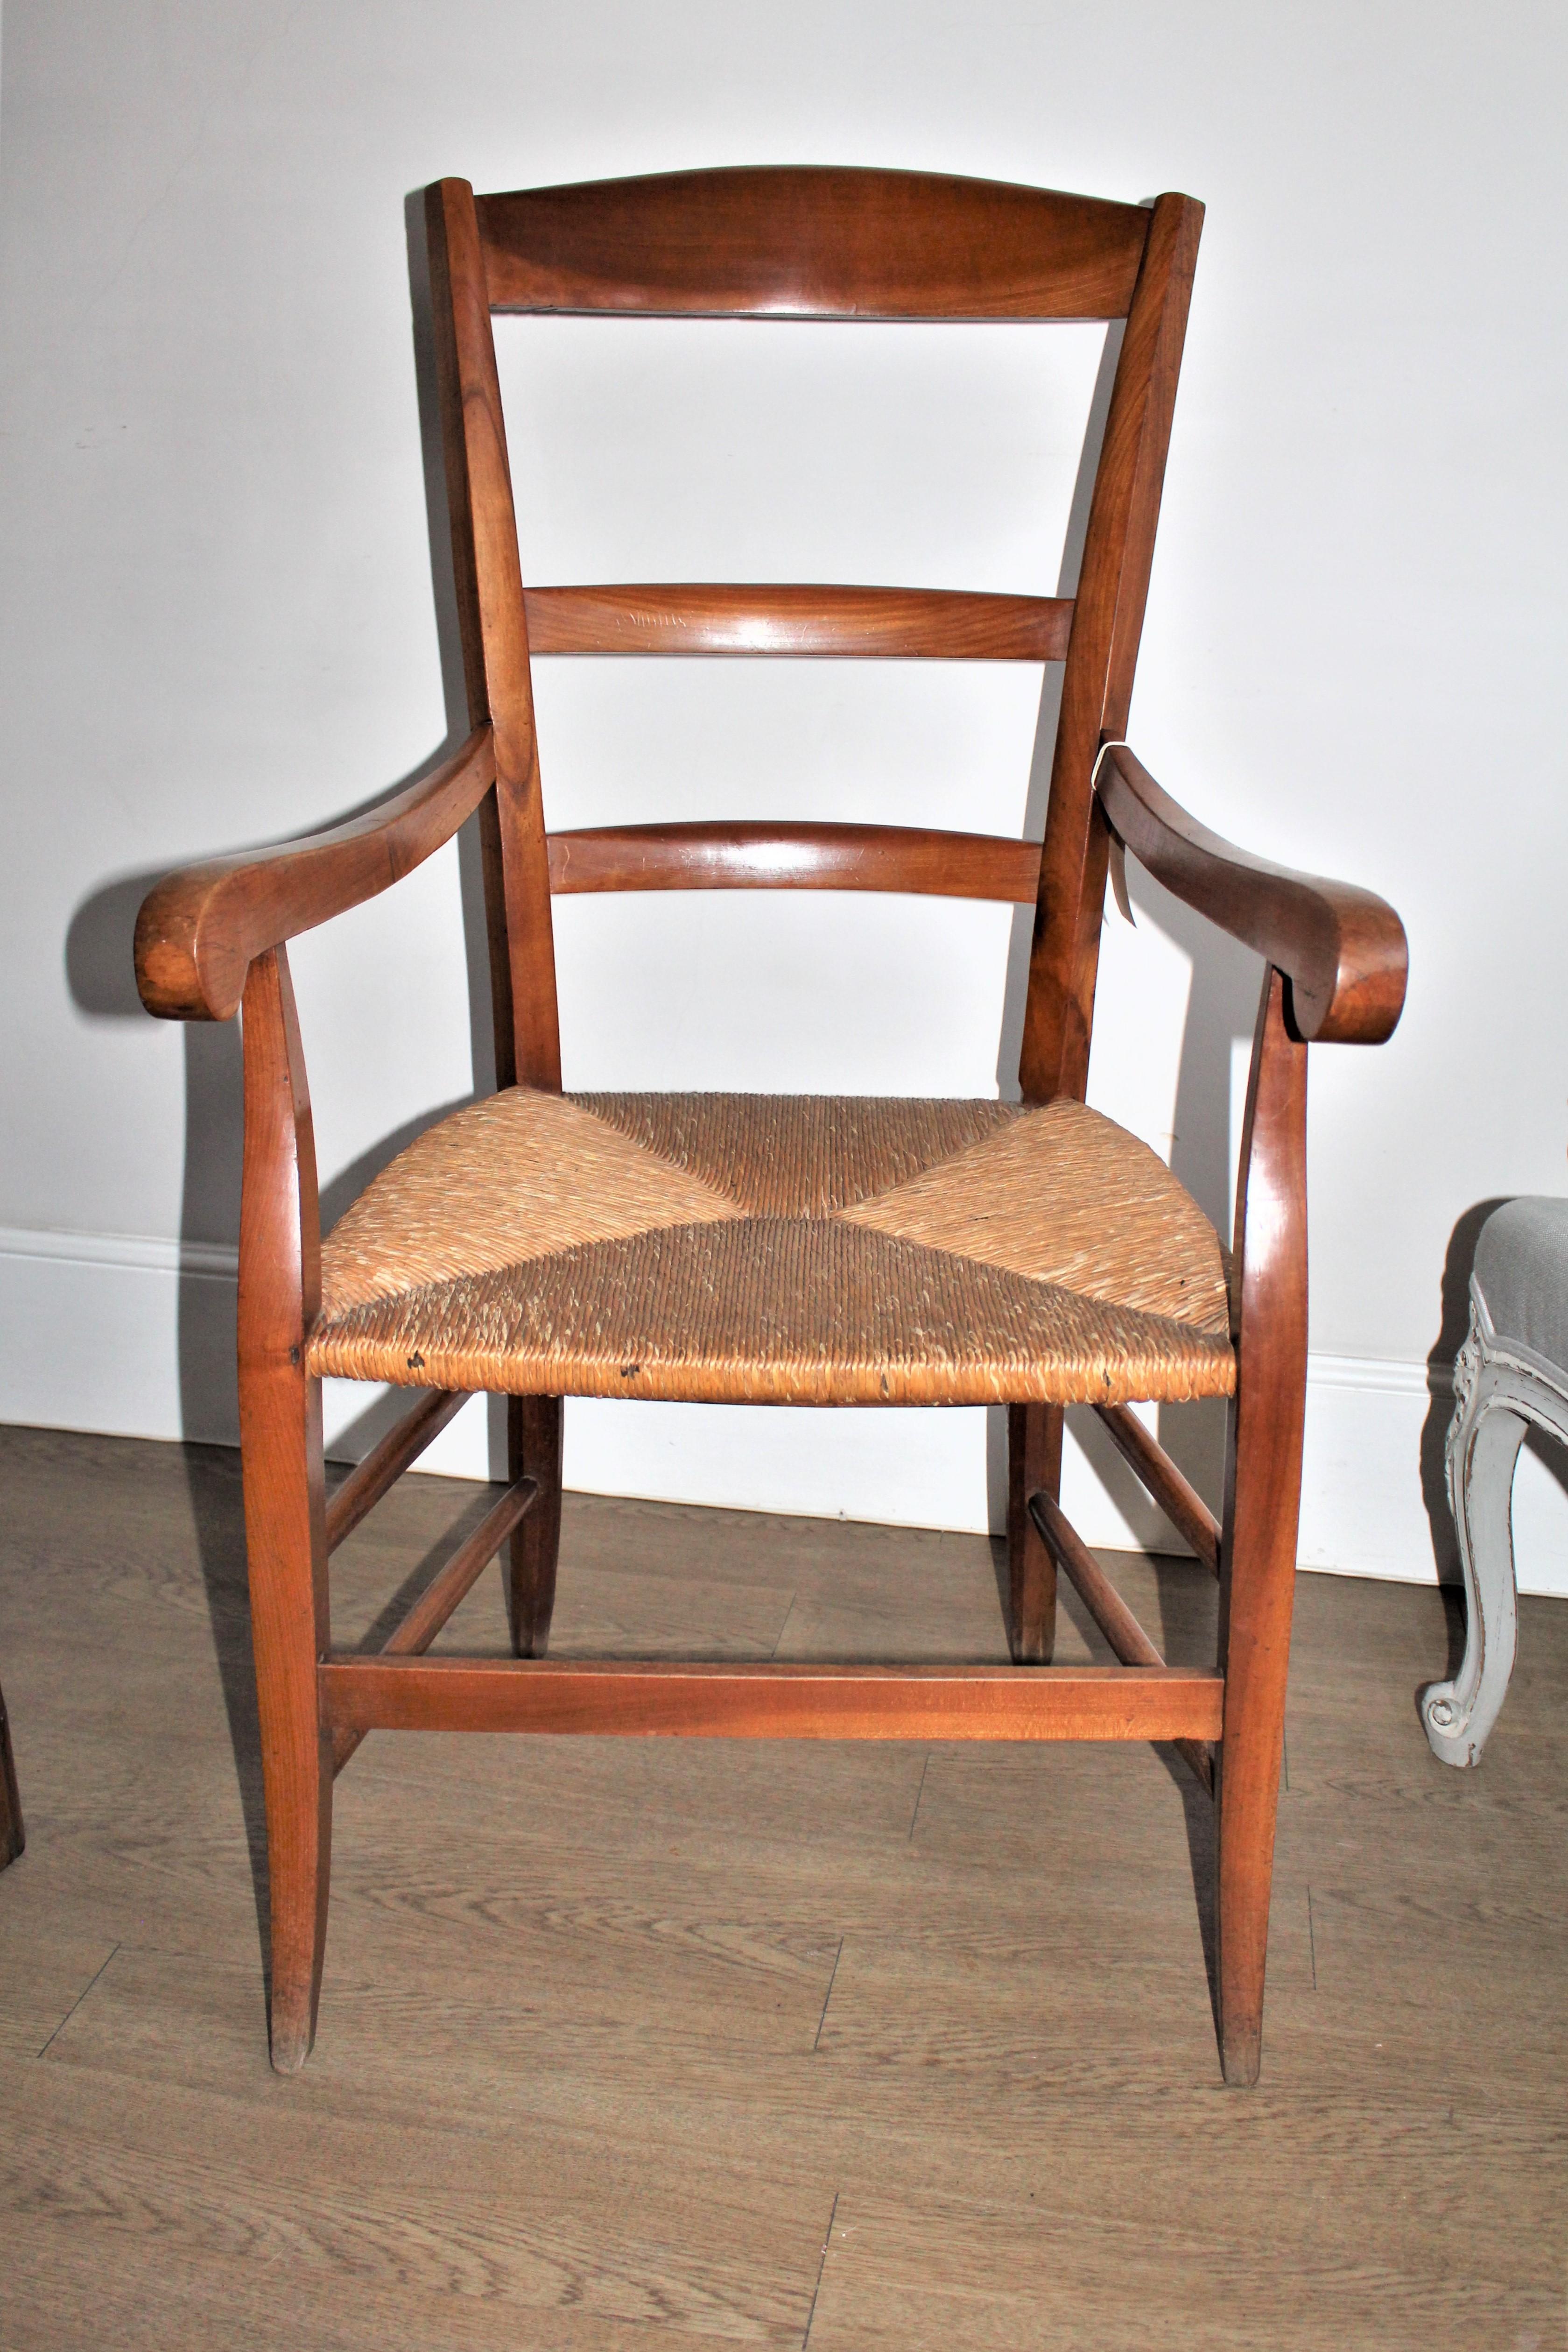 Early 1900s country French provincial cherrywood armchair with rush seat.
The rush seat being in very good condition makes it a comfortable chair.
This chair will look good in most rooms, either as a reading chair, by the fireplace, or simply to